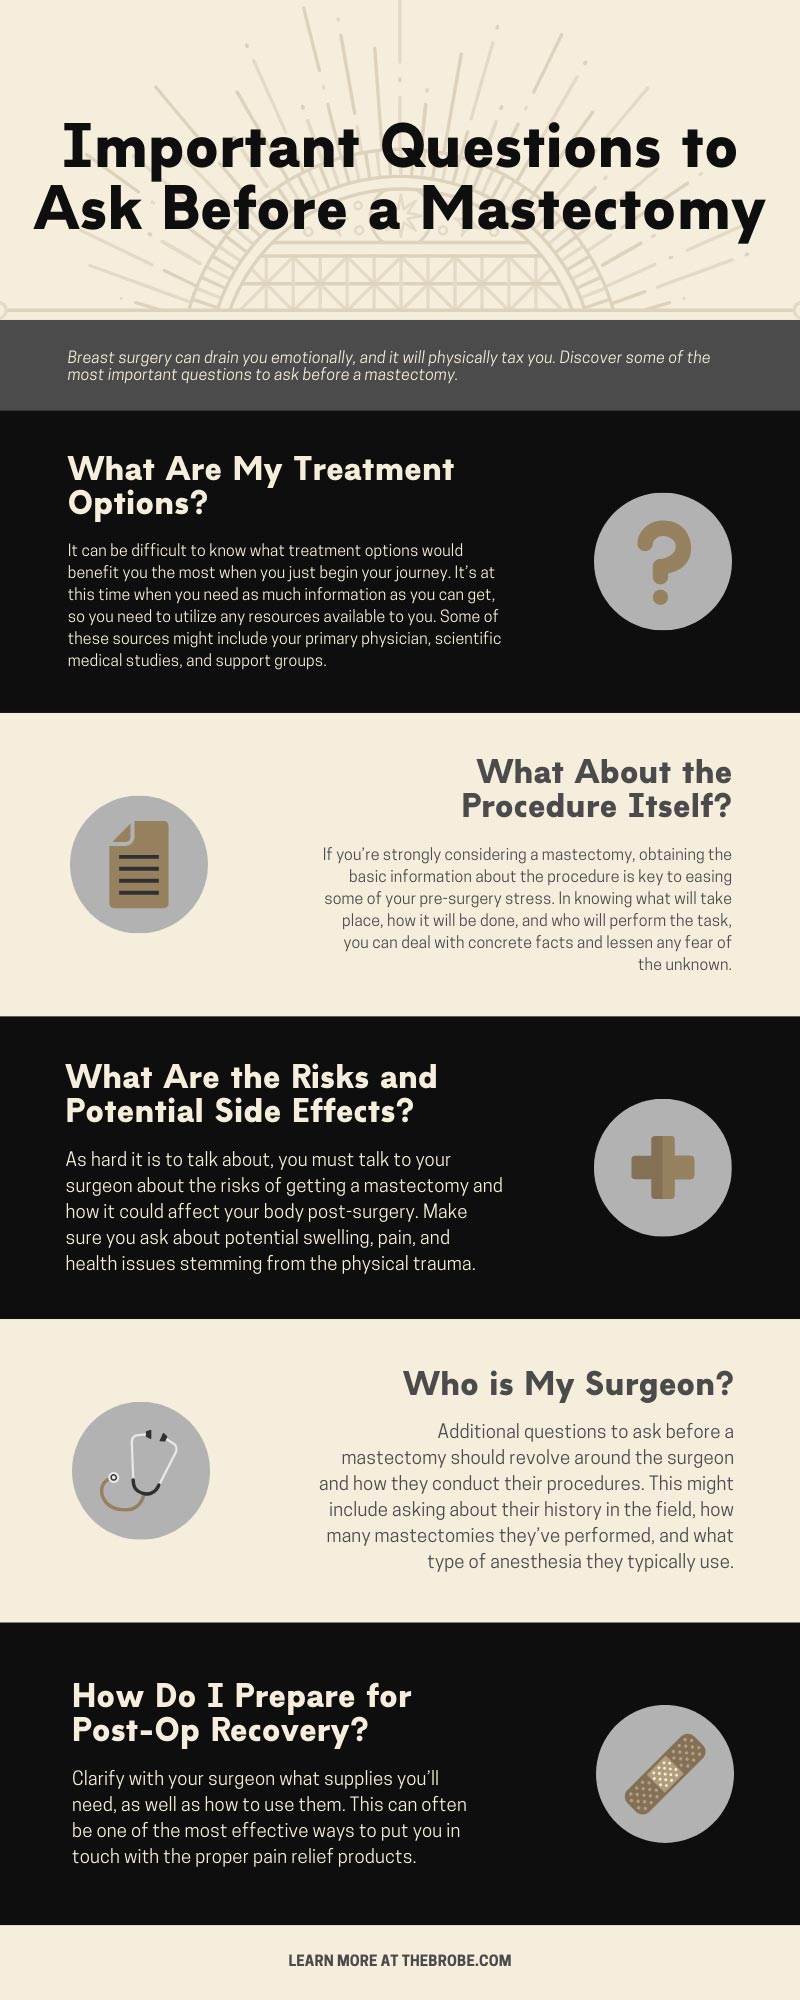 Important Questions to Ask Before a Mastectomy infographic